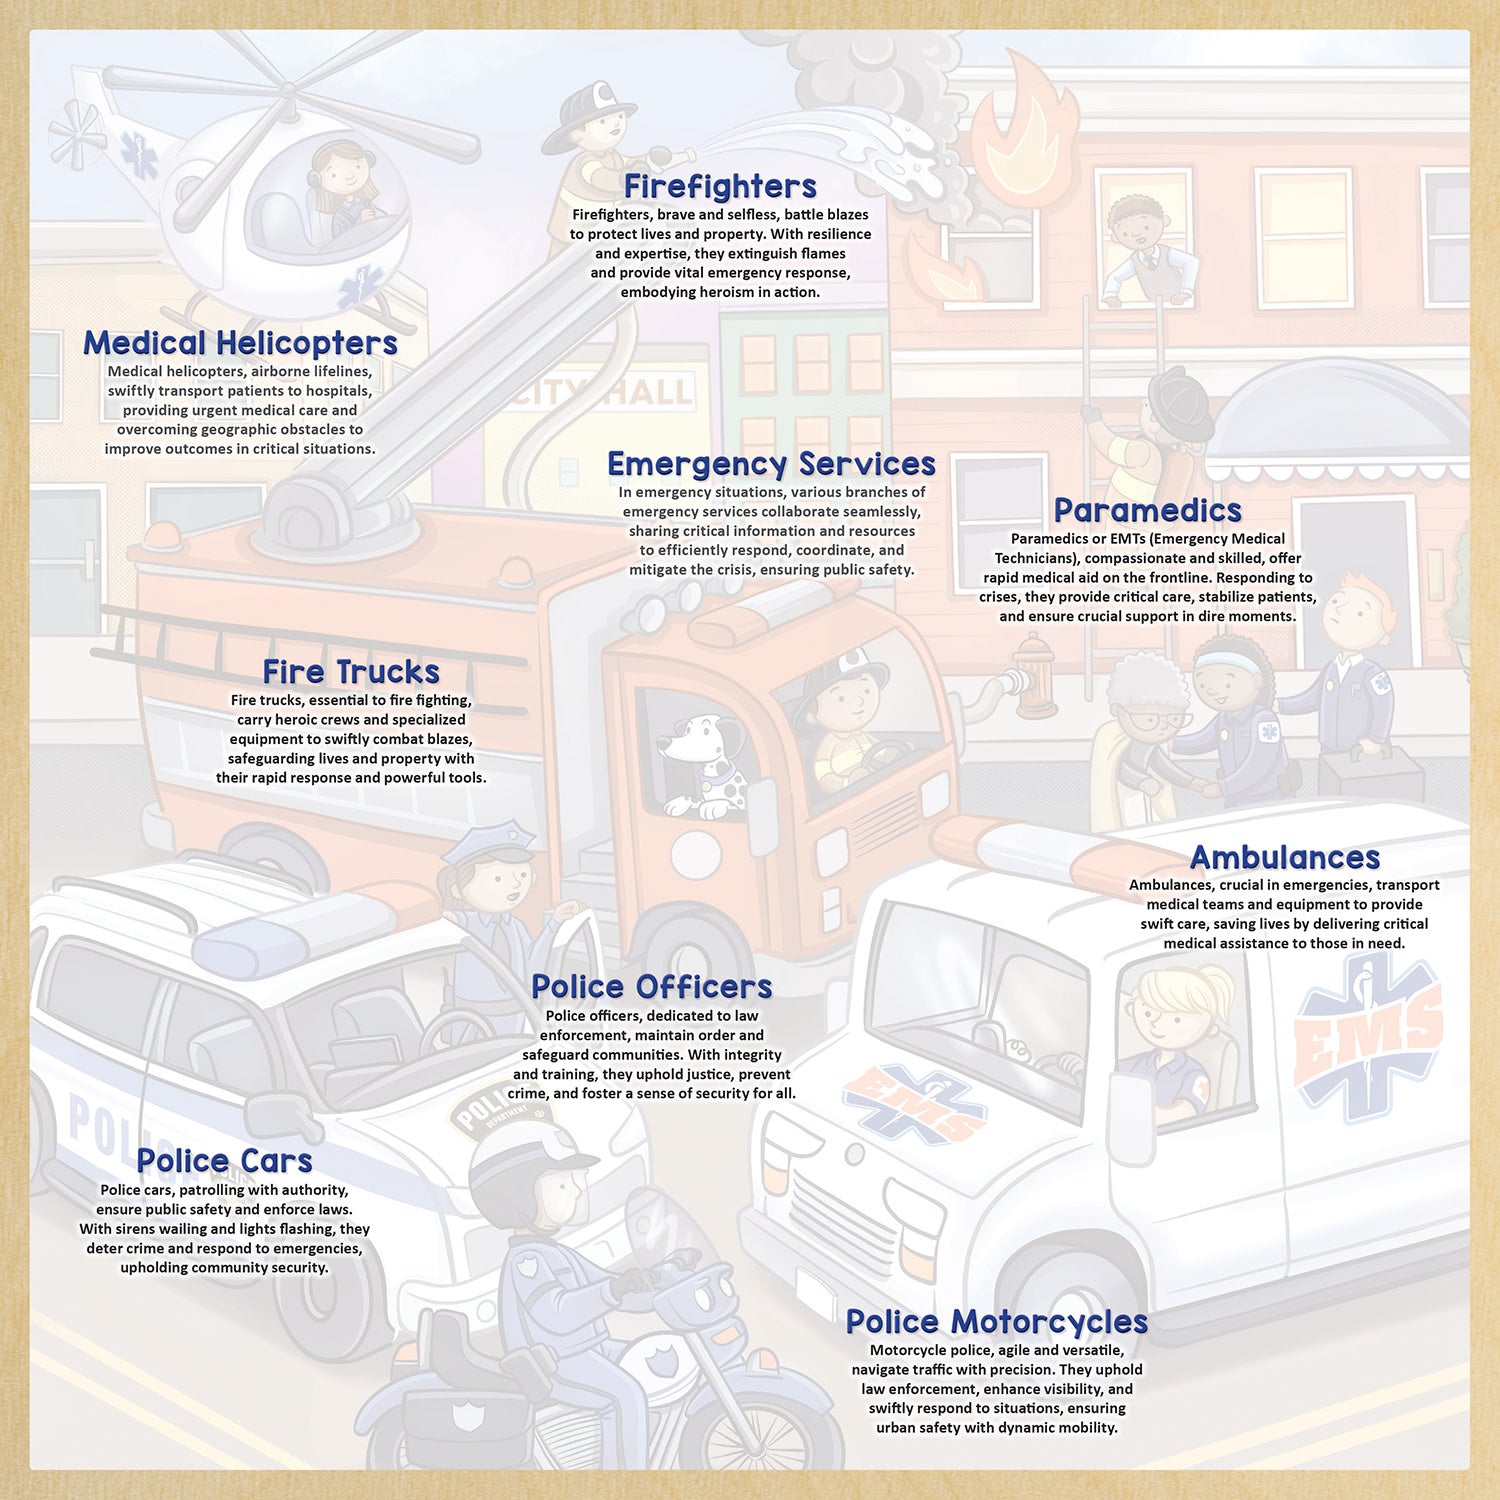 Wood Fun Facts - Emergency Vehicles 48 Piece Wood Jigsaw Puzzle